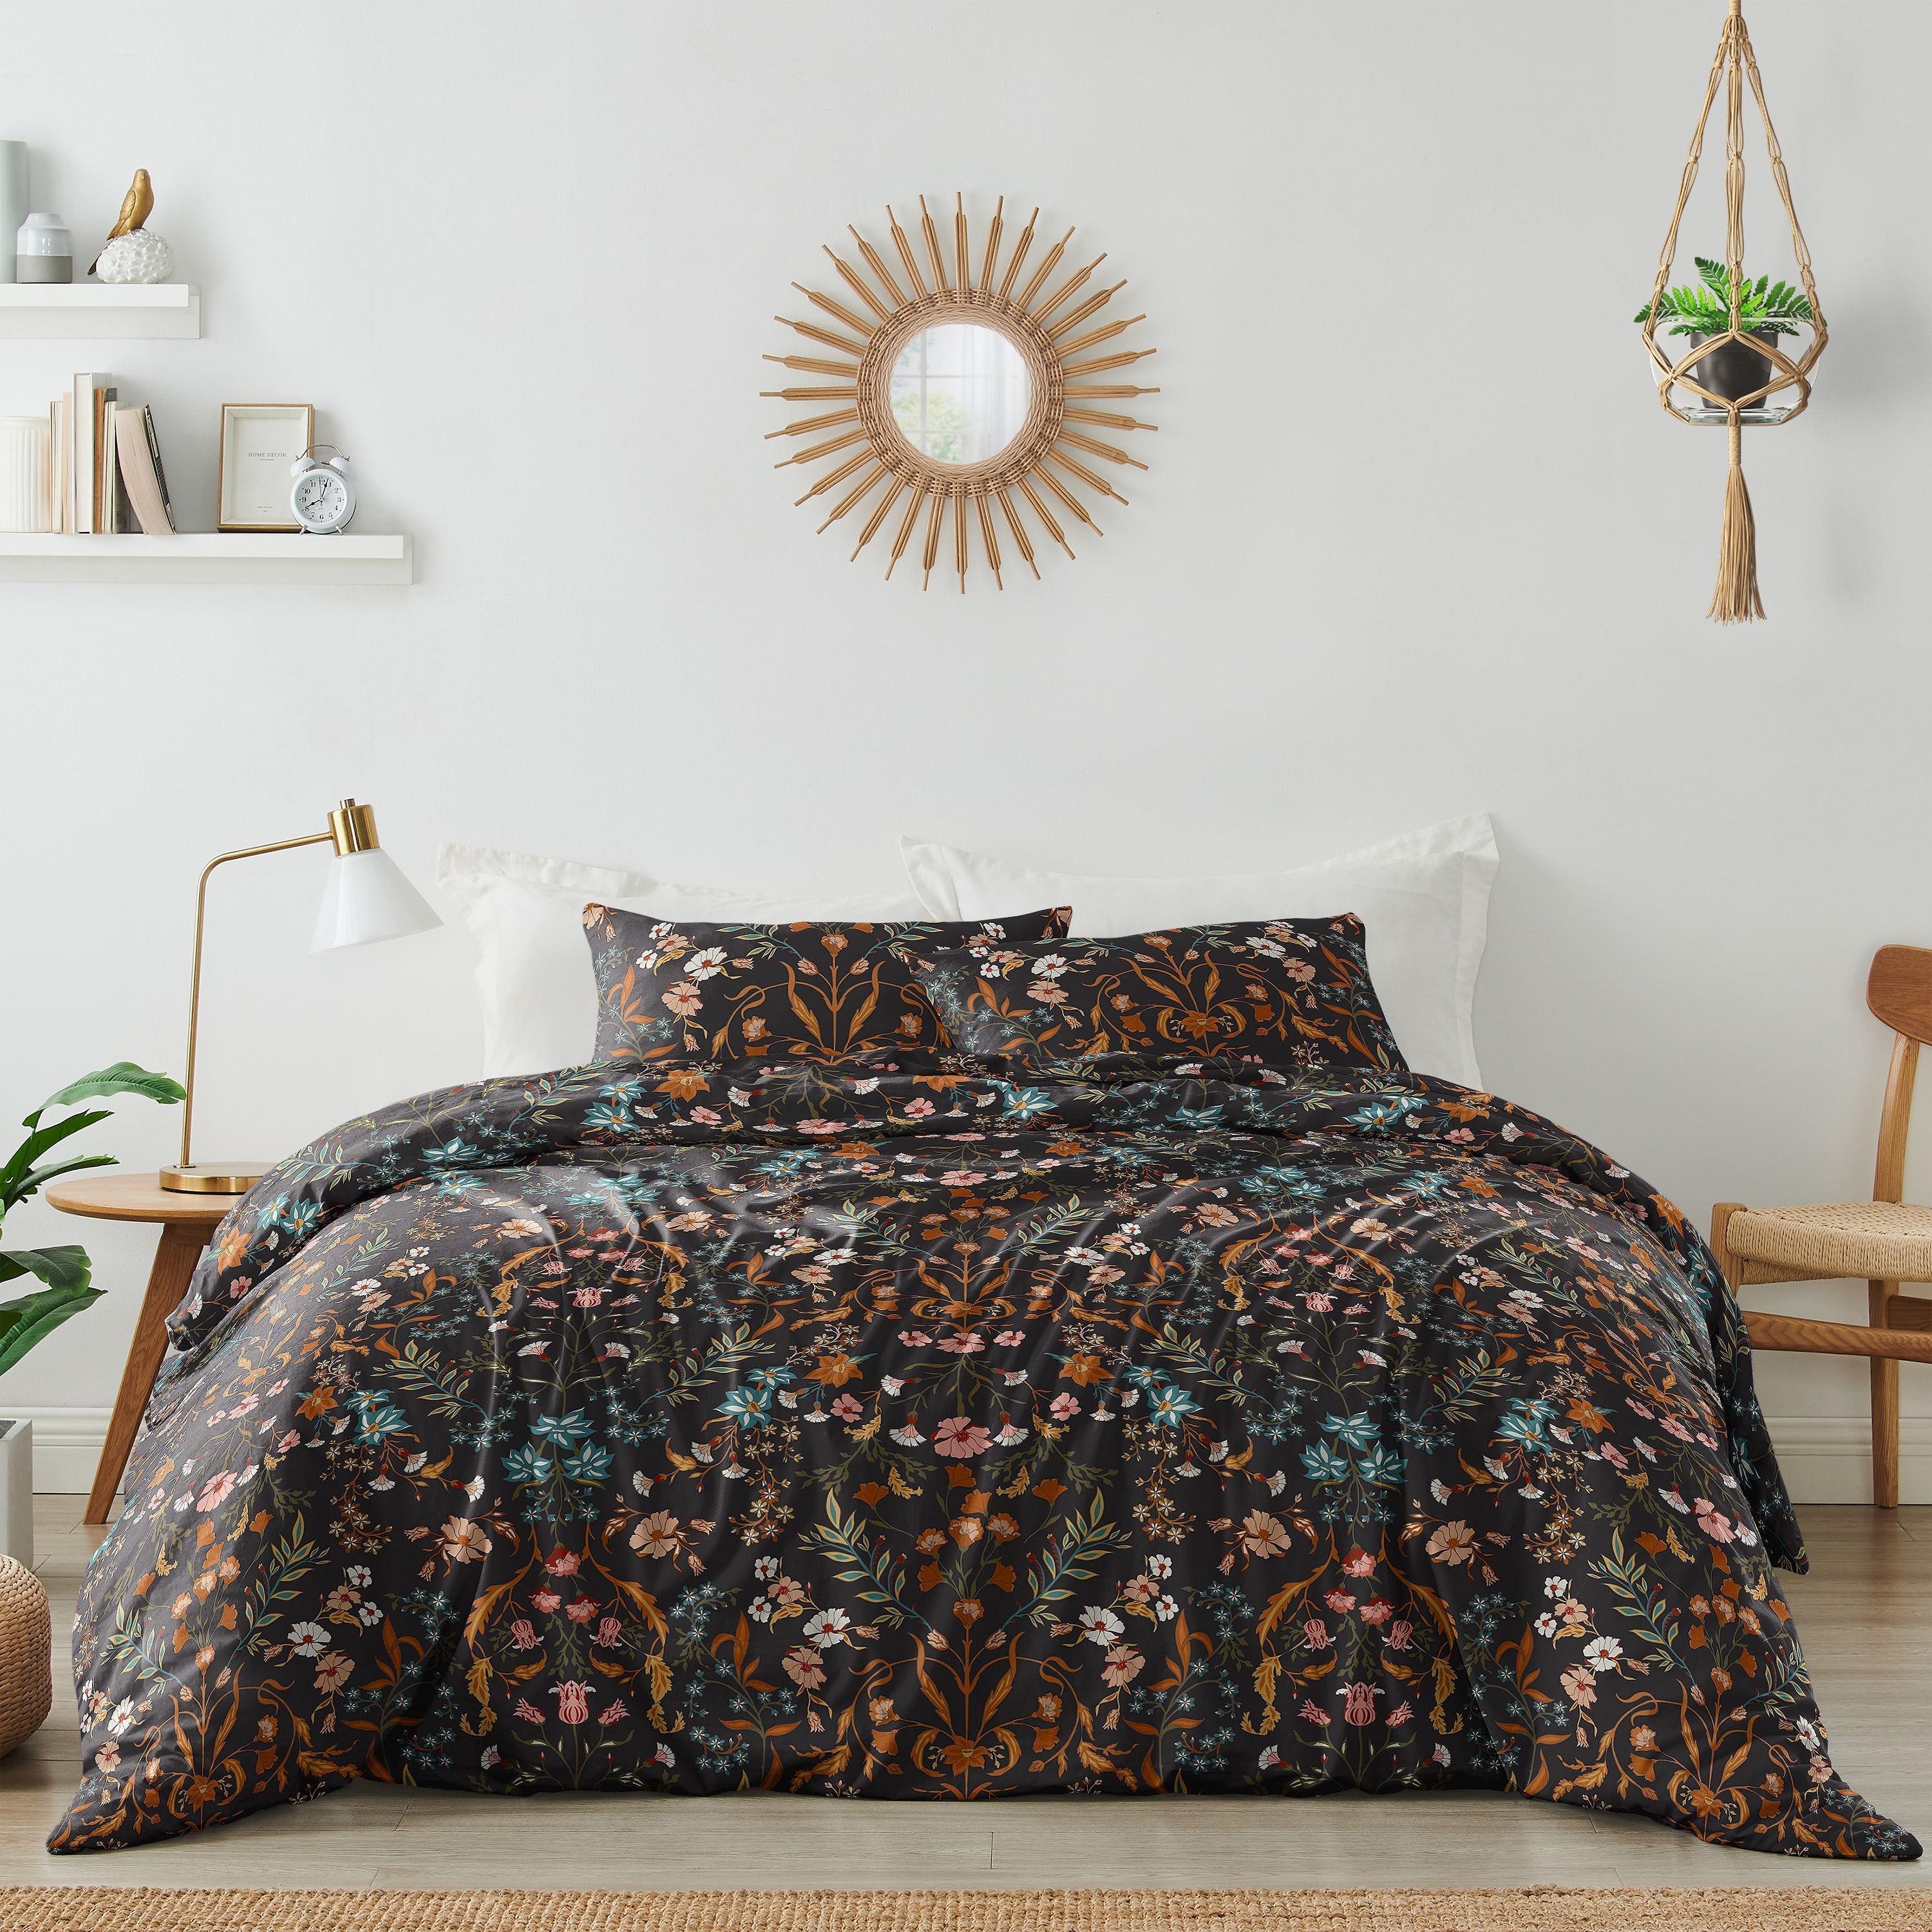 Tiger Lion - Coma Inducer Oversized Comforter - Light Fawn - Queen